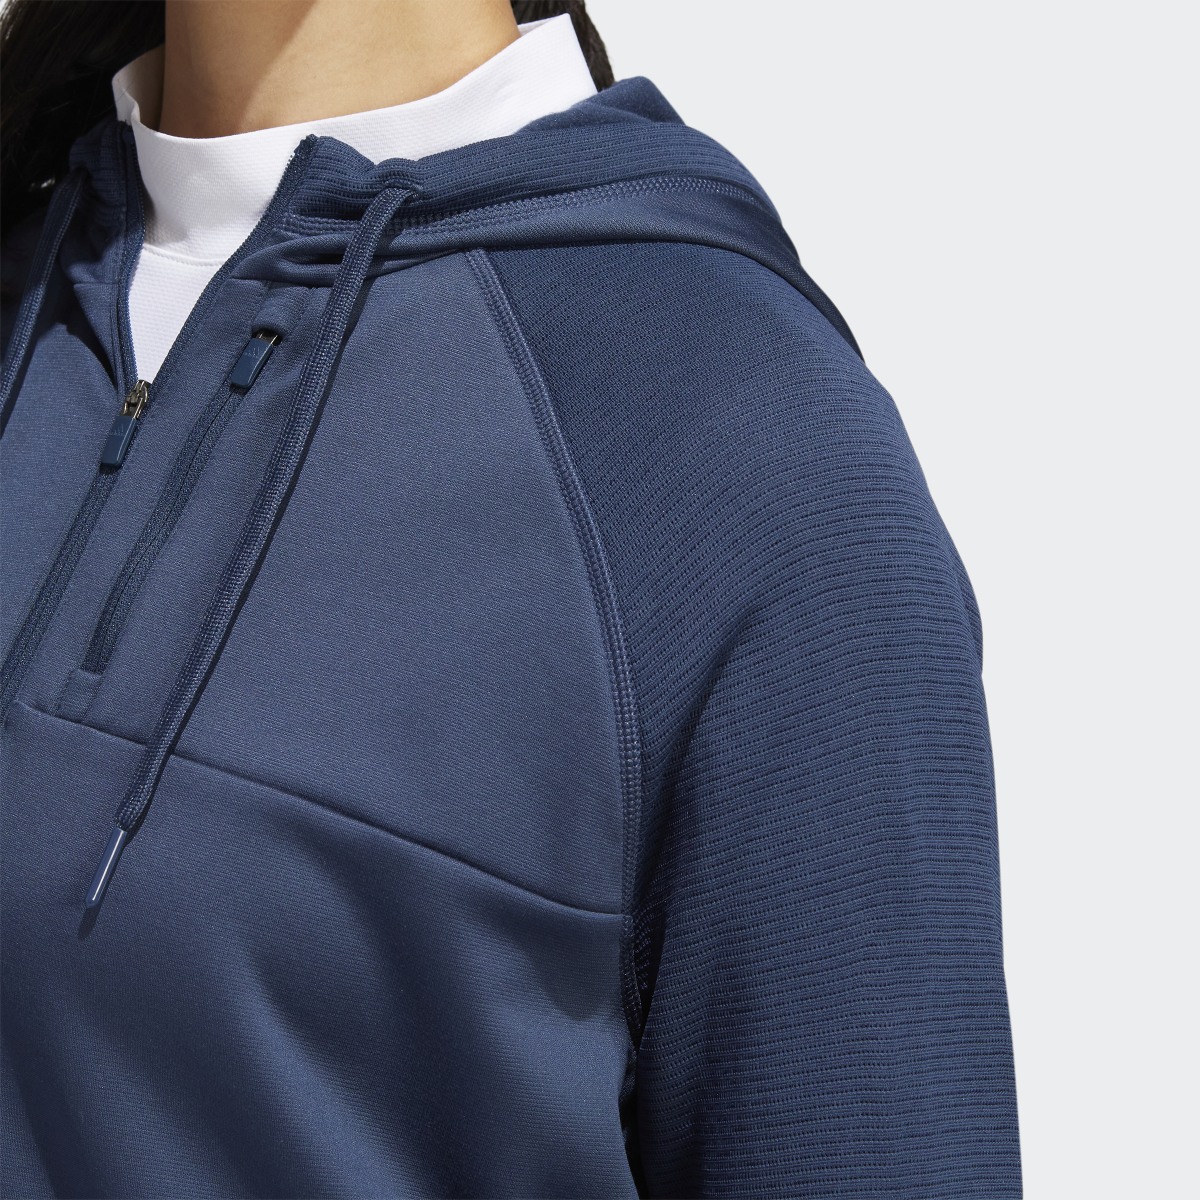 Adidas Parka COLD.RDY Full-Zip. 8